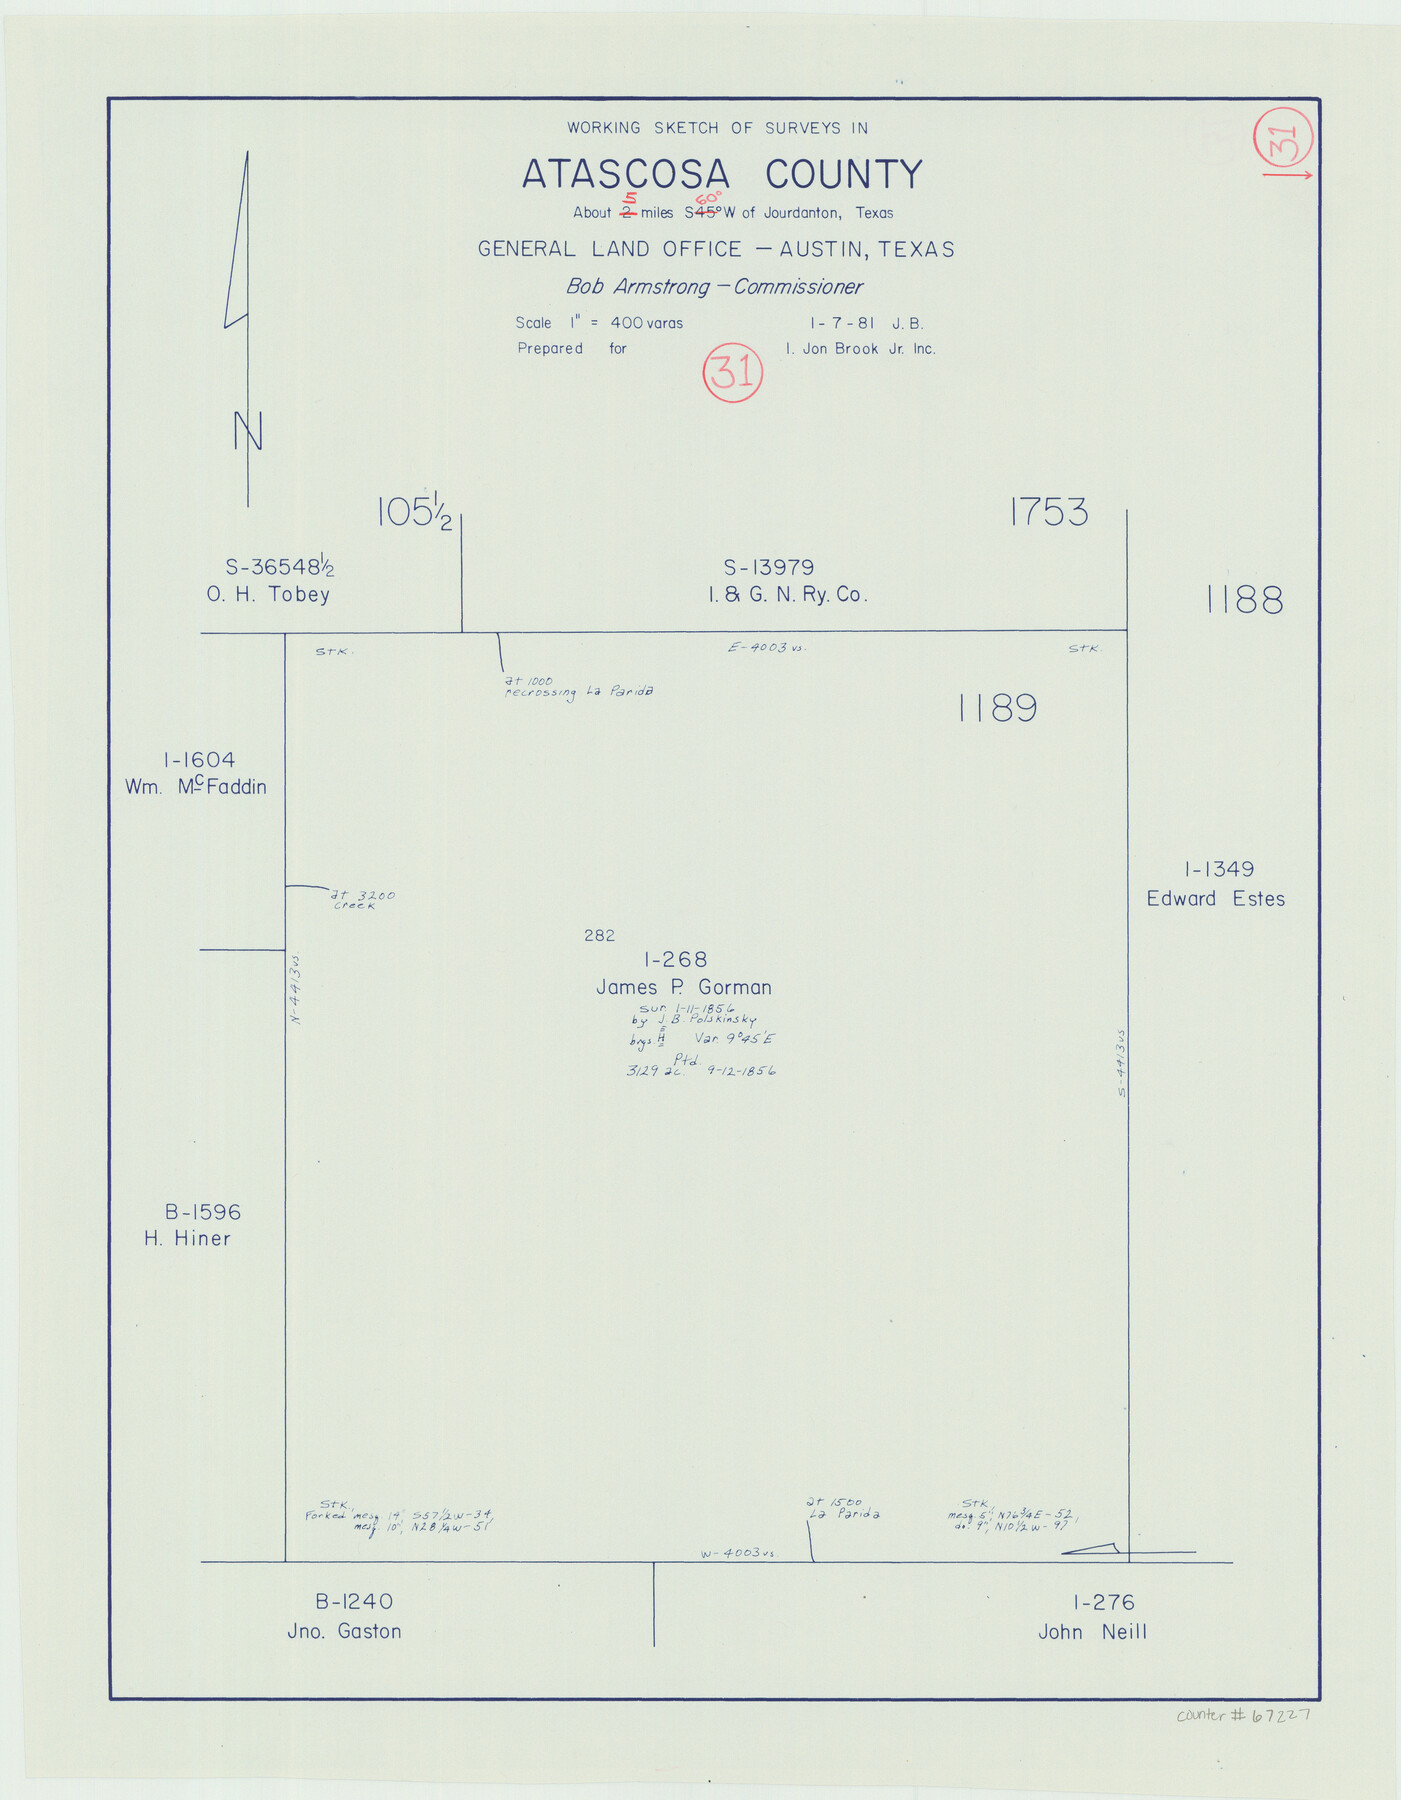 67227, Atascosa County Working Sketch 31, General Map Collection